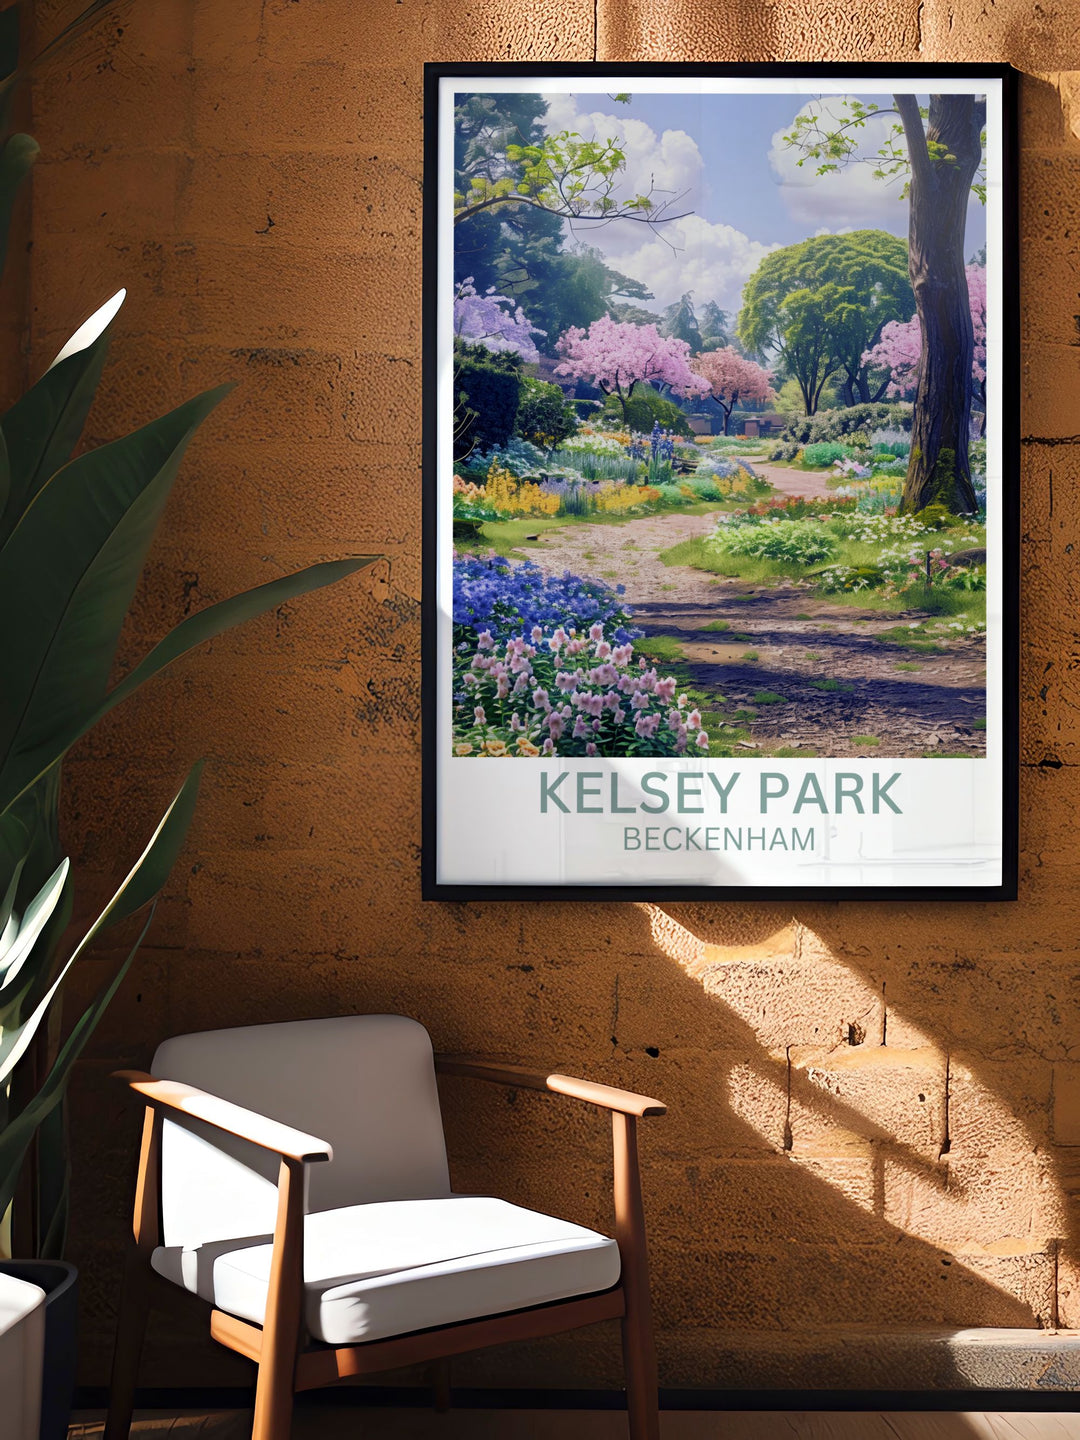 Detailed print of Kelsey Parks wildlife and natural habitats ideal for adding a touch of the wild to your home decor